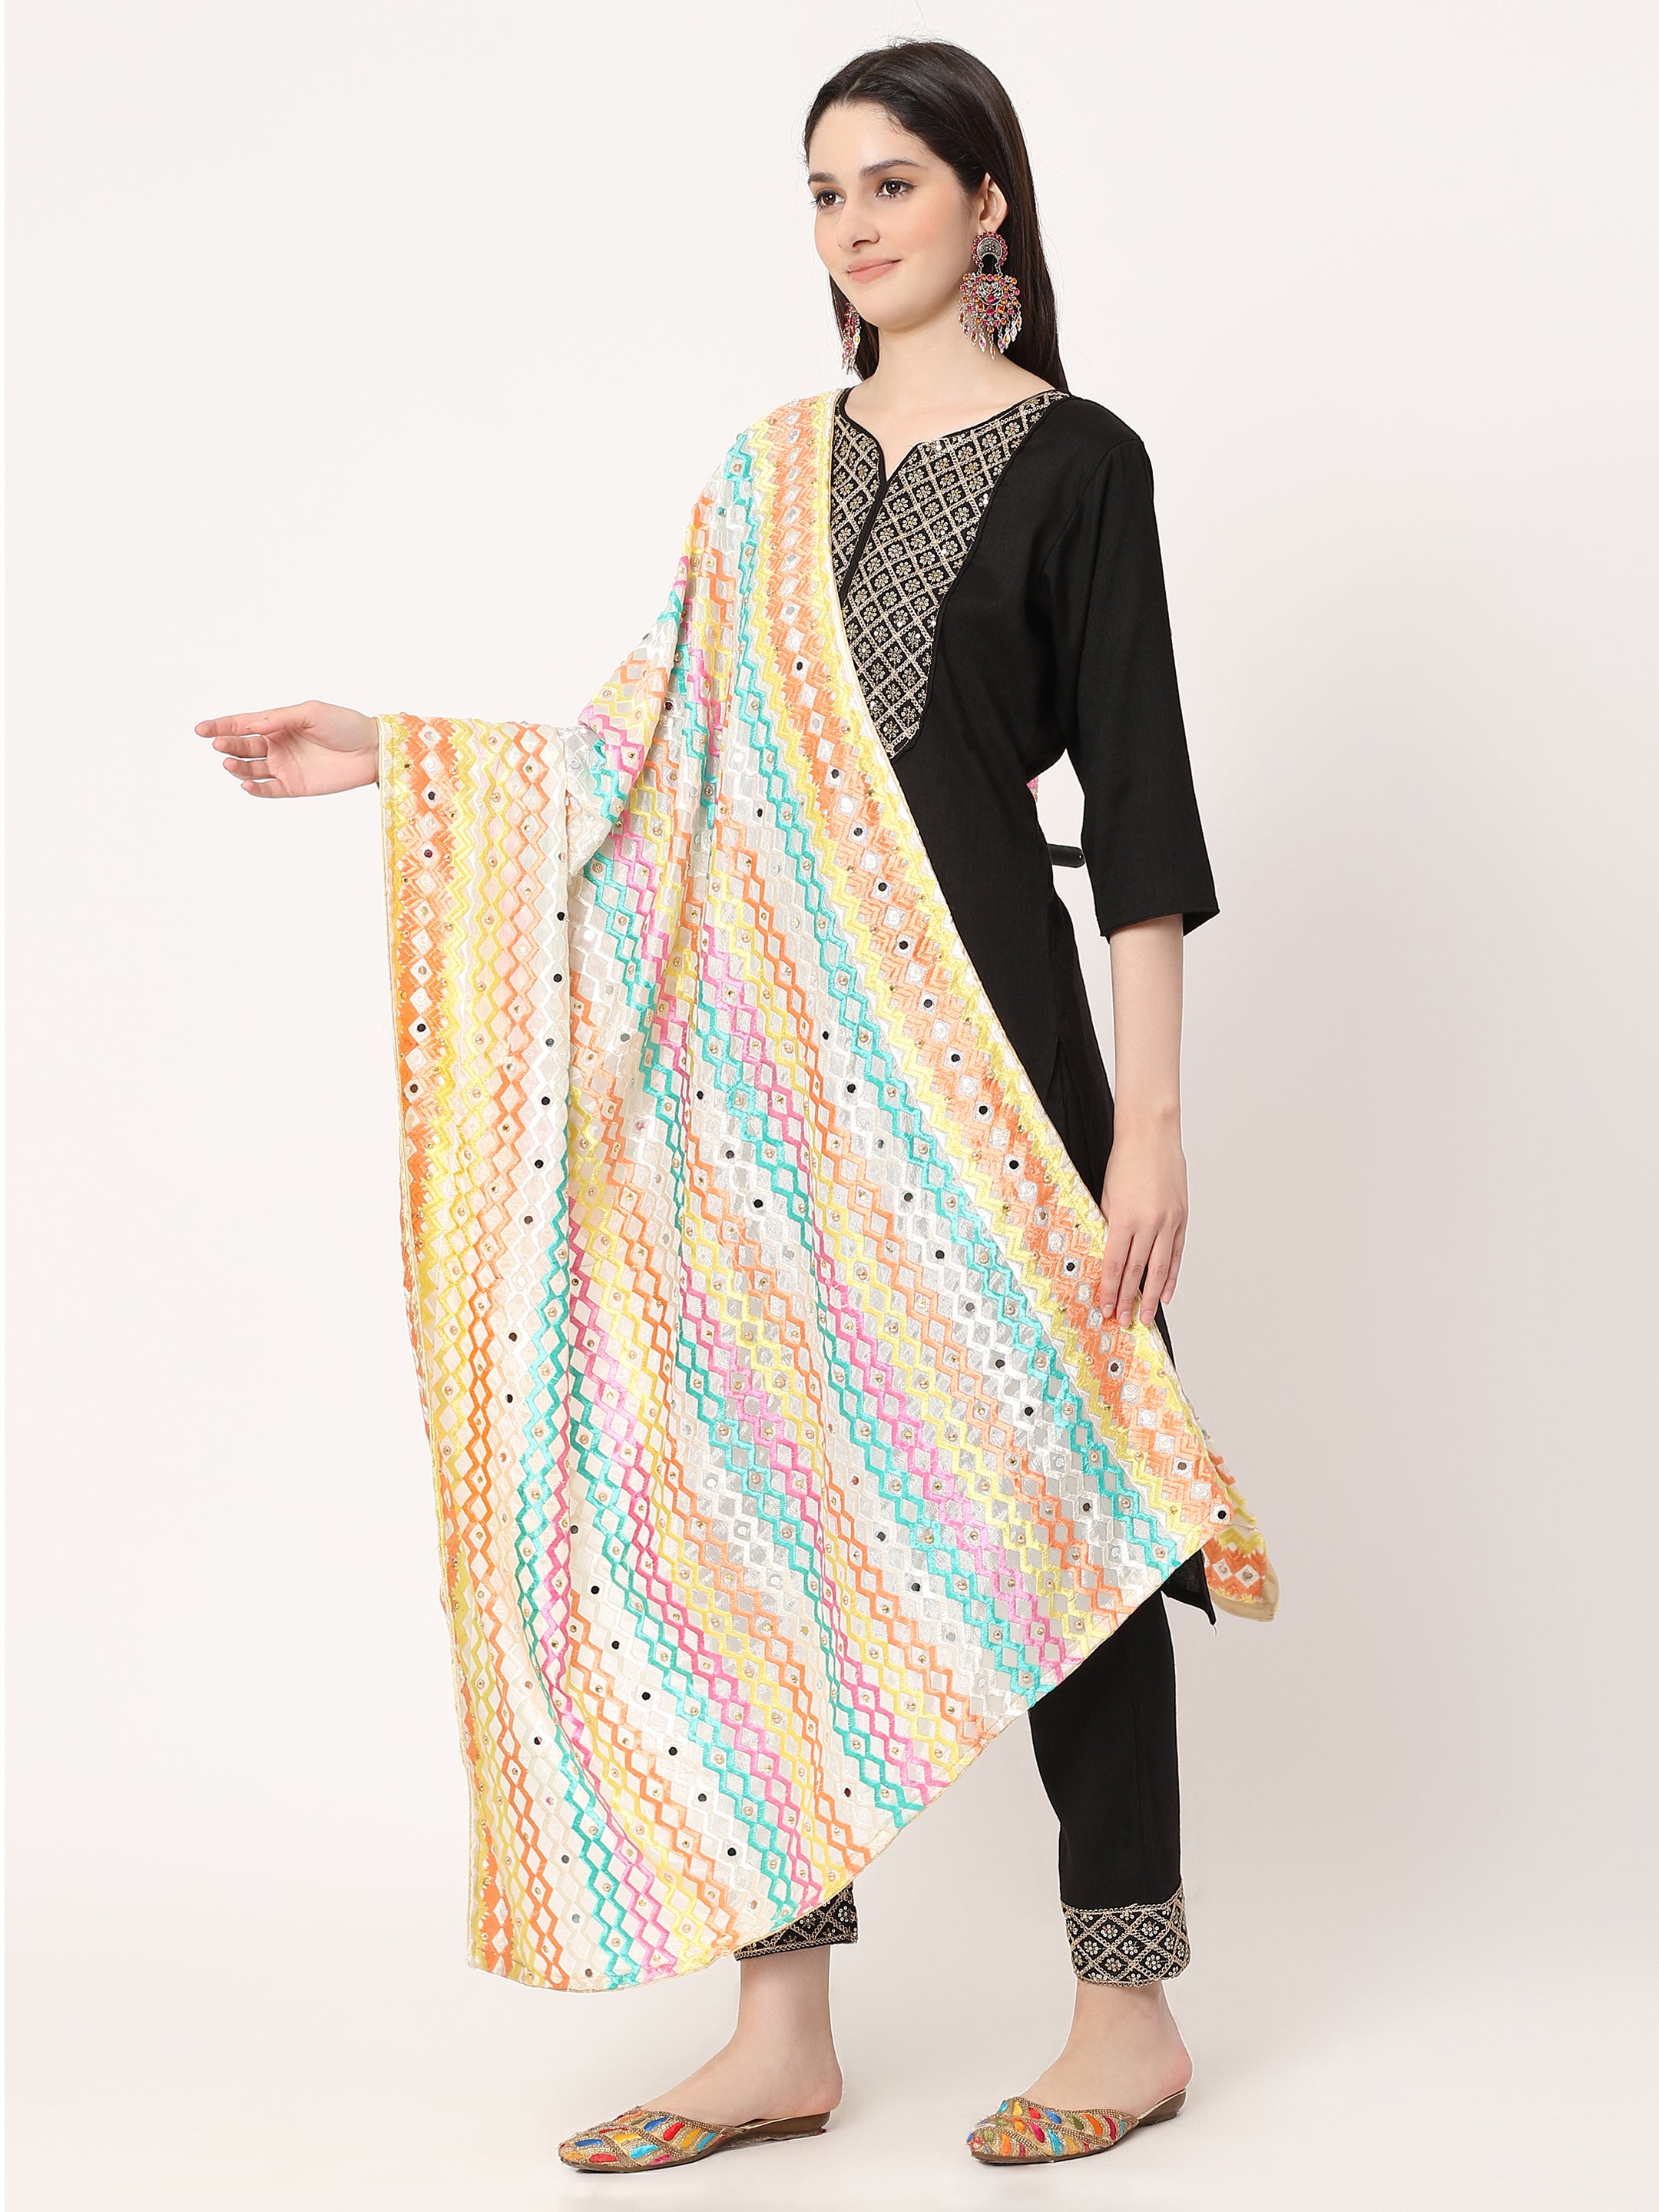 off-white-multicolour-embroidery-phulkari-dupatta-with-beads-and-pearl-mcrcpd0204-moda-chales-2